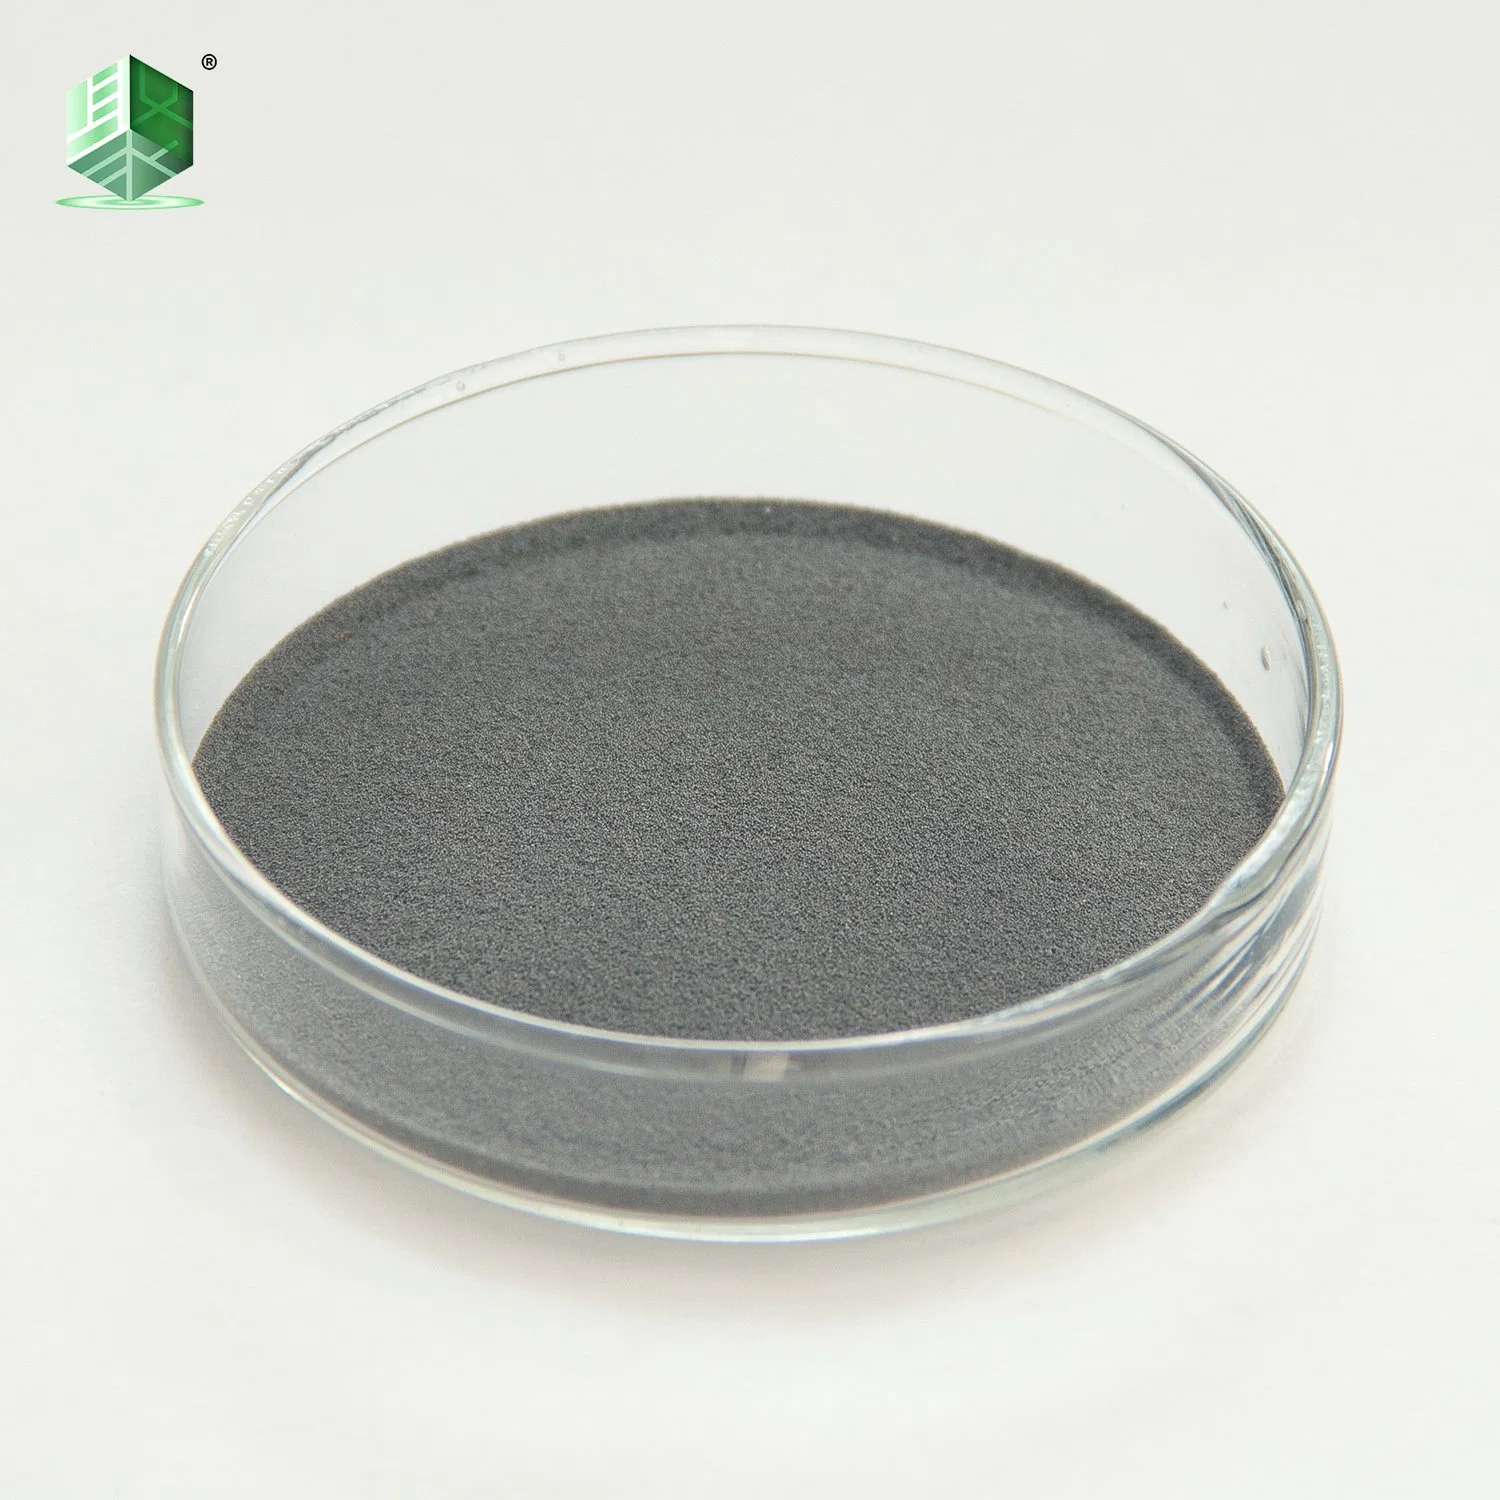 The Manufacturer Directly Supplies 40-80 Mesh Crushed Tungsten Carbide Particles